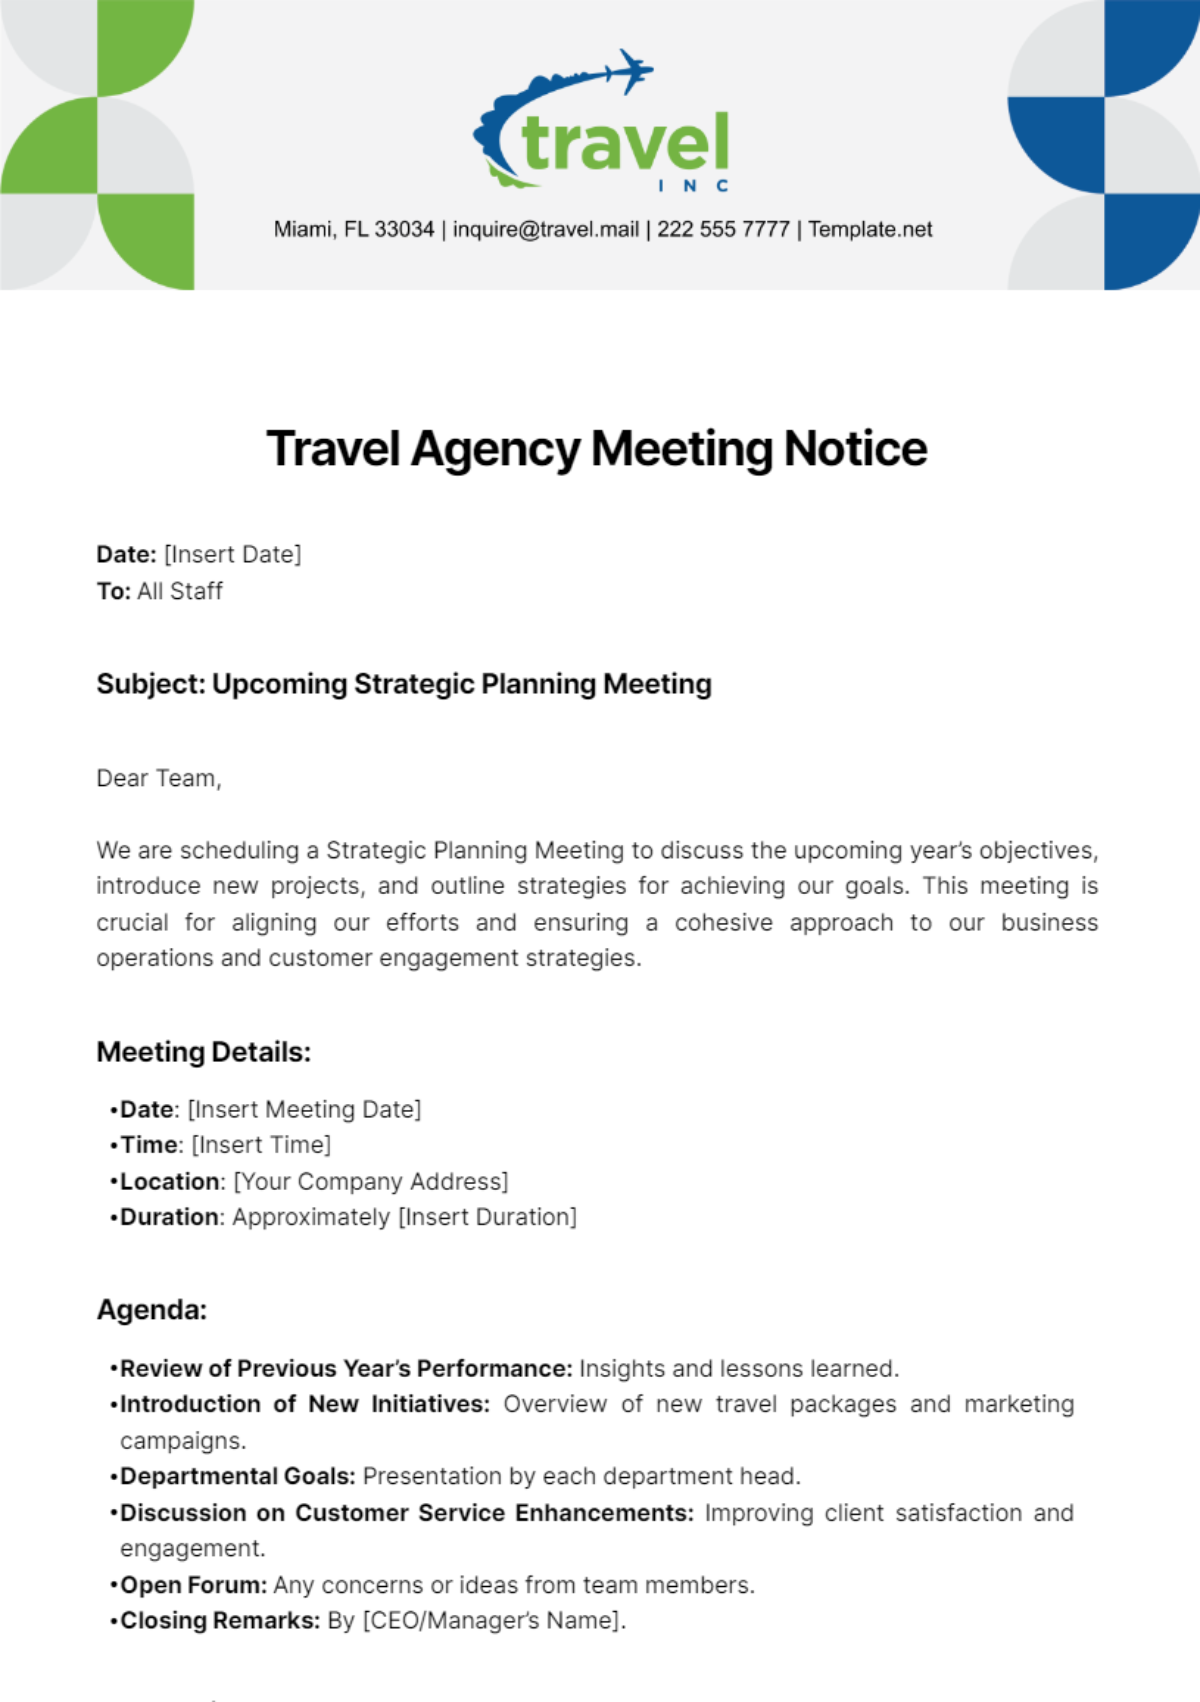 Travel Agency Meeting Notice Template